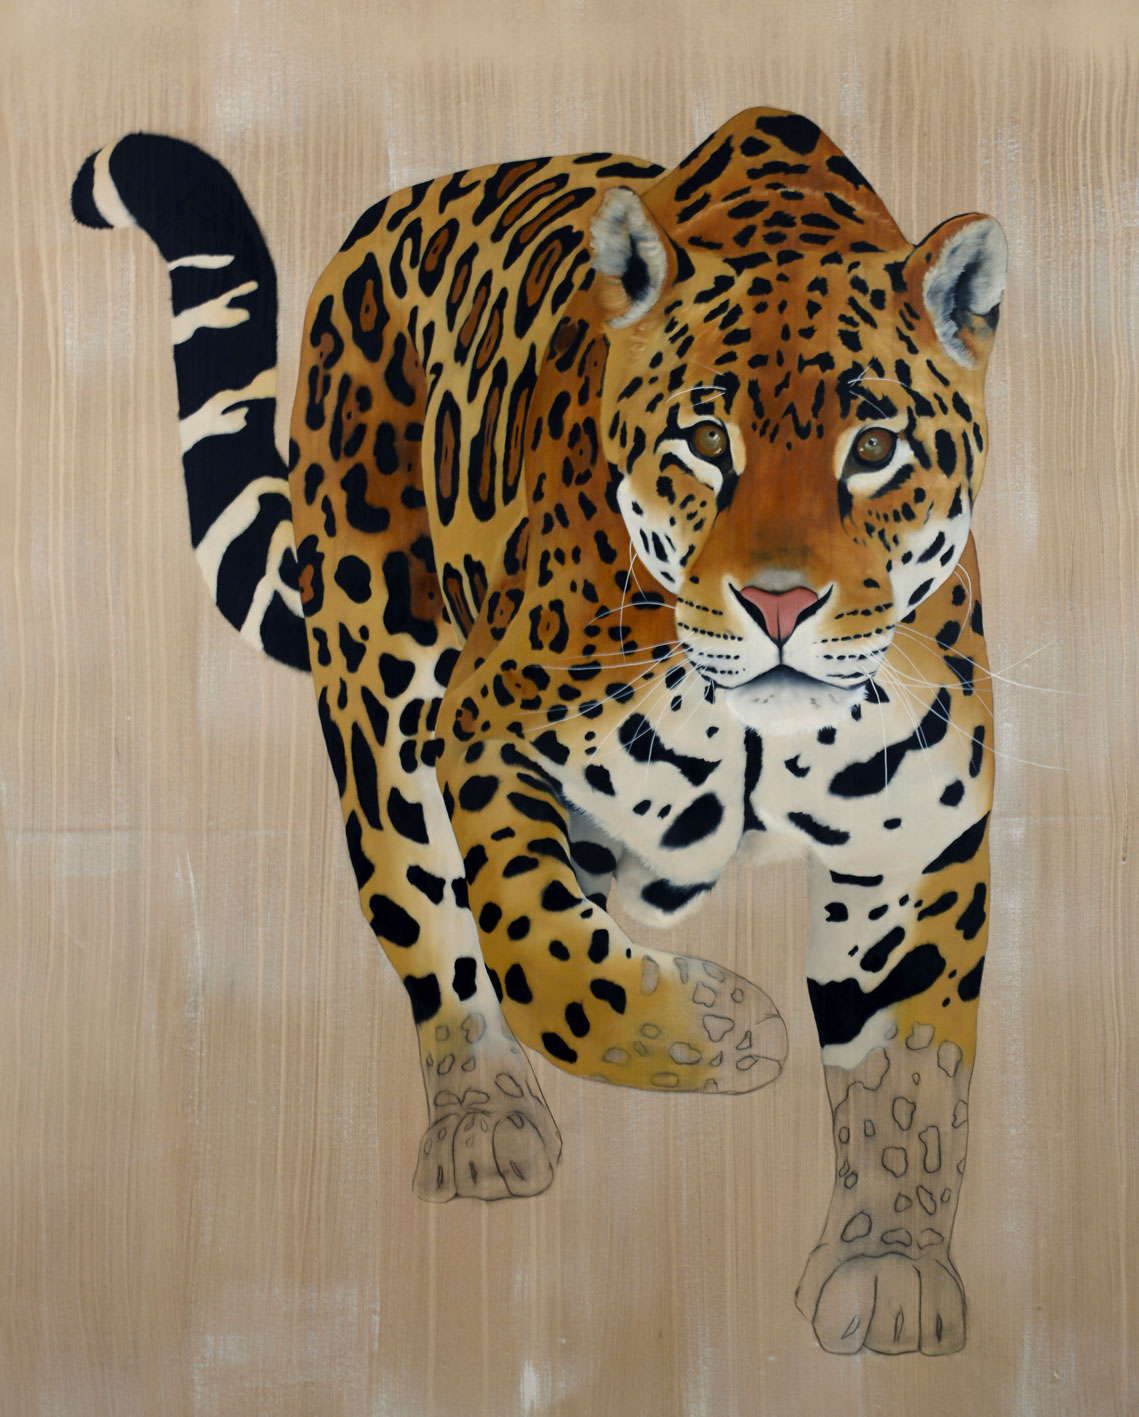 PANTHERA ONCA panthera-onca-jaguar-delete-threatened-endangered-extinction- Thierry Bisch Contemporary painter animals painting art  nature biodiversity conservation 